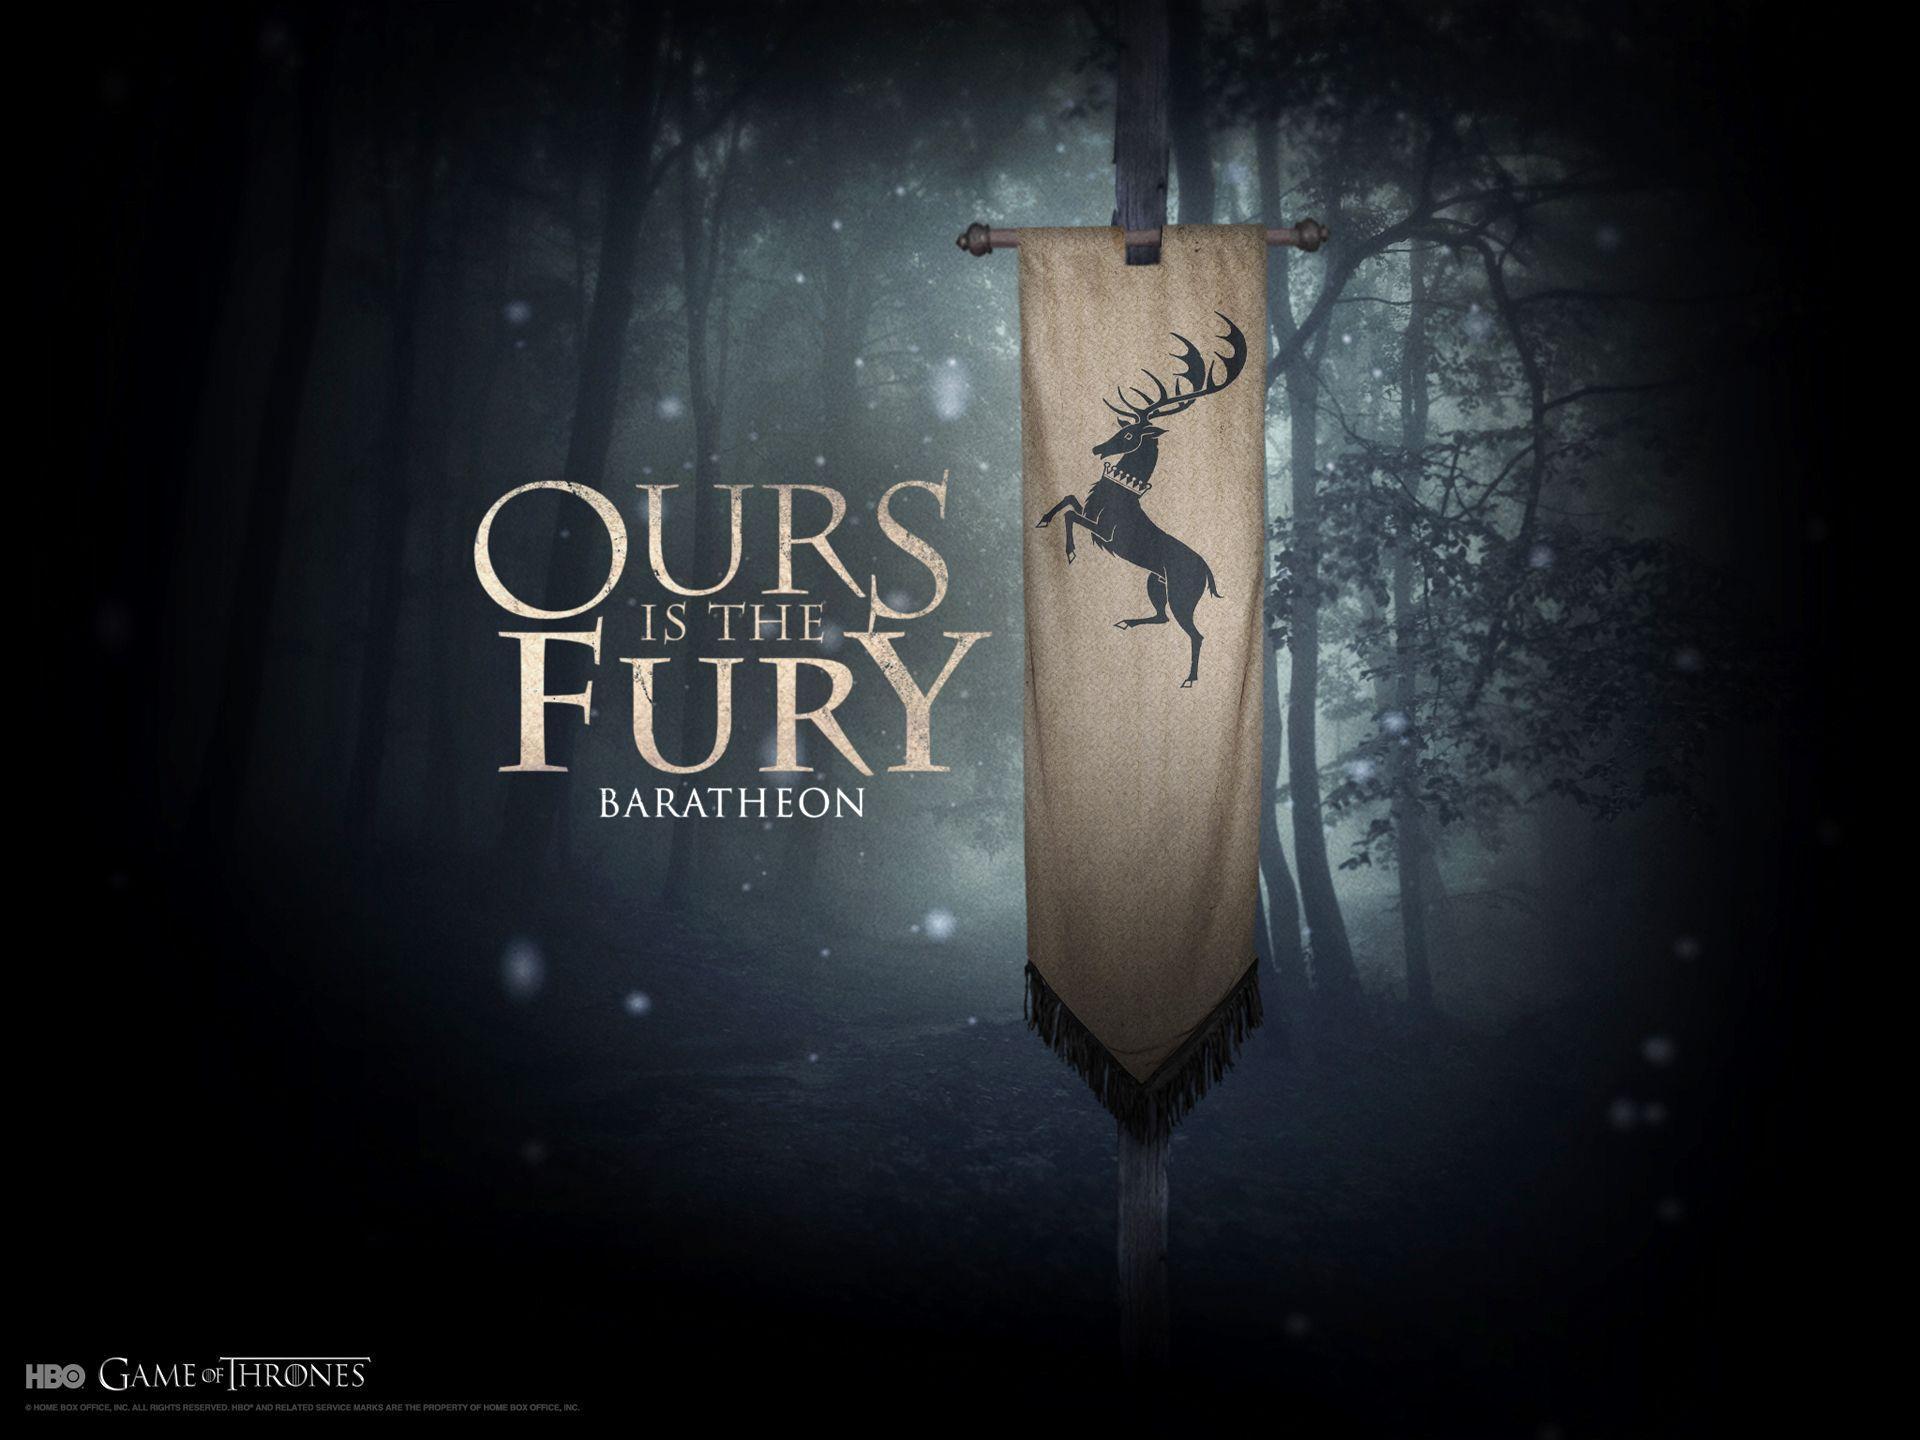 best image about Game of thrones Wallpaper. Game